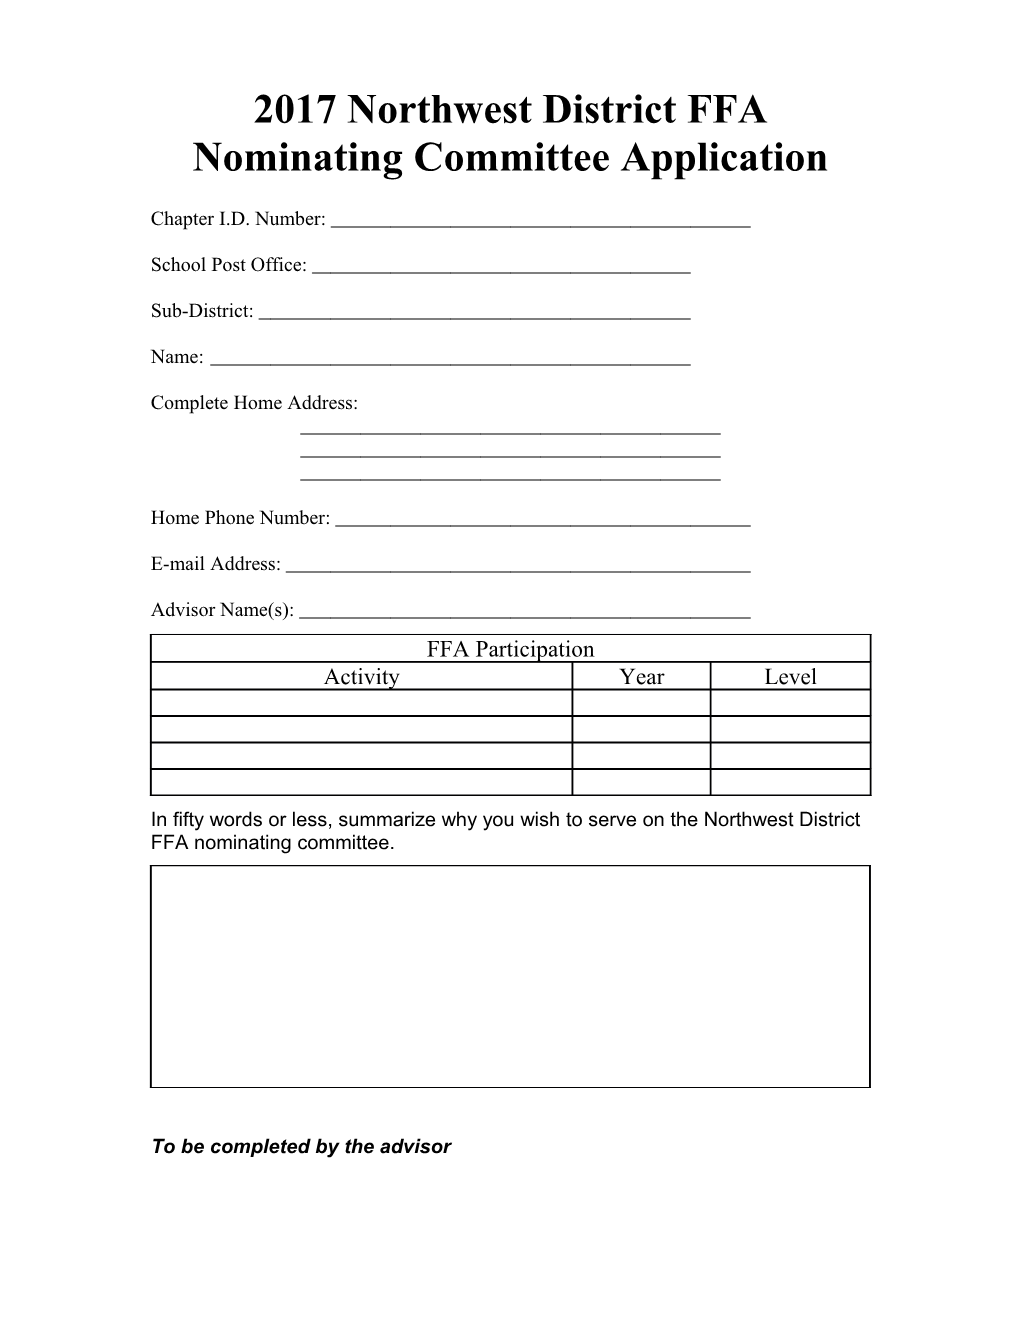 Dear Nominating Committee Applicant